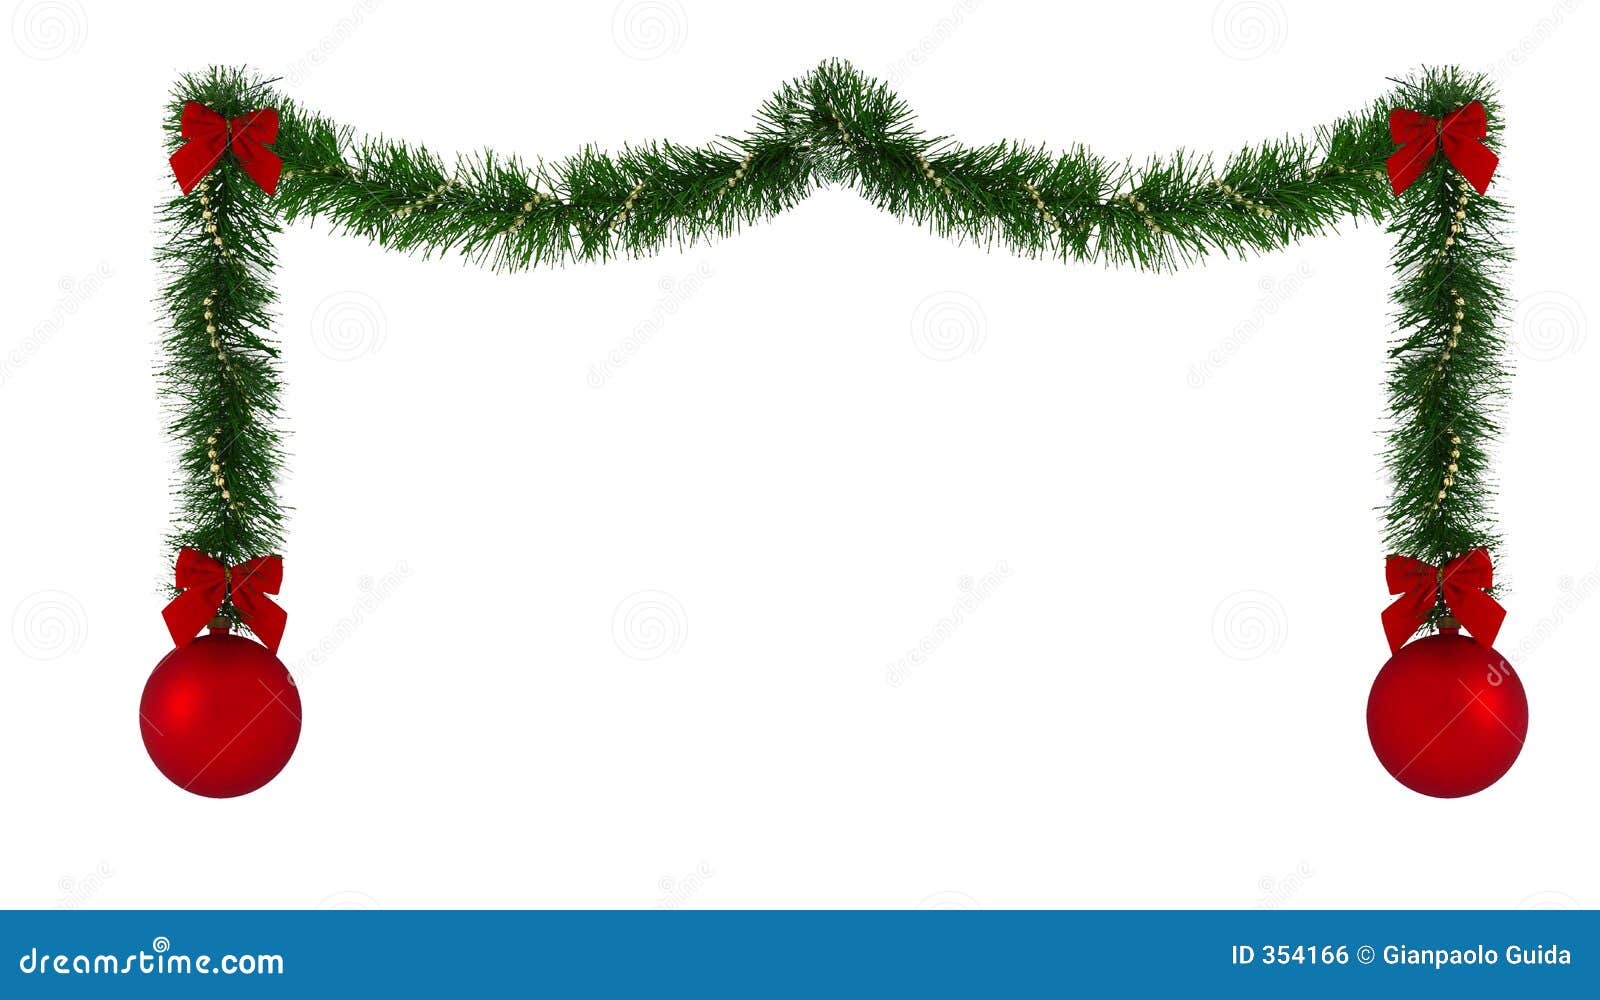 free clipart holiday decorations - photo #34